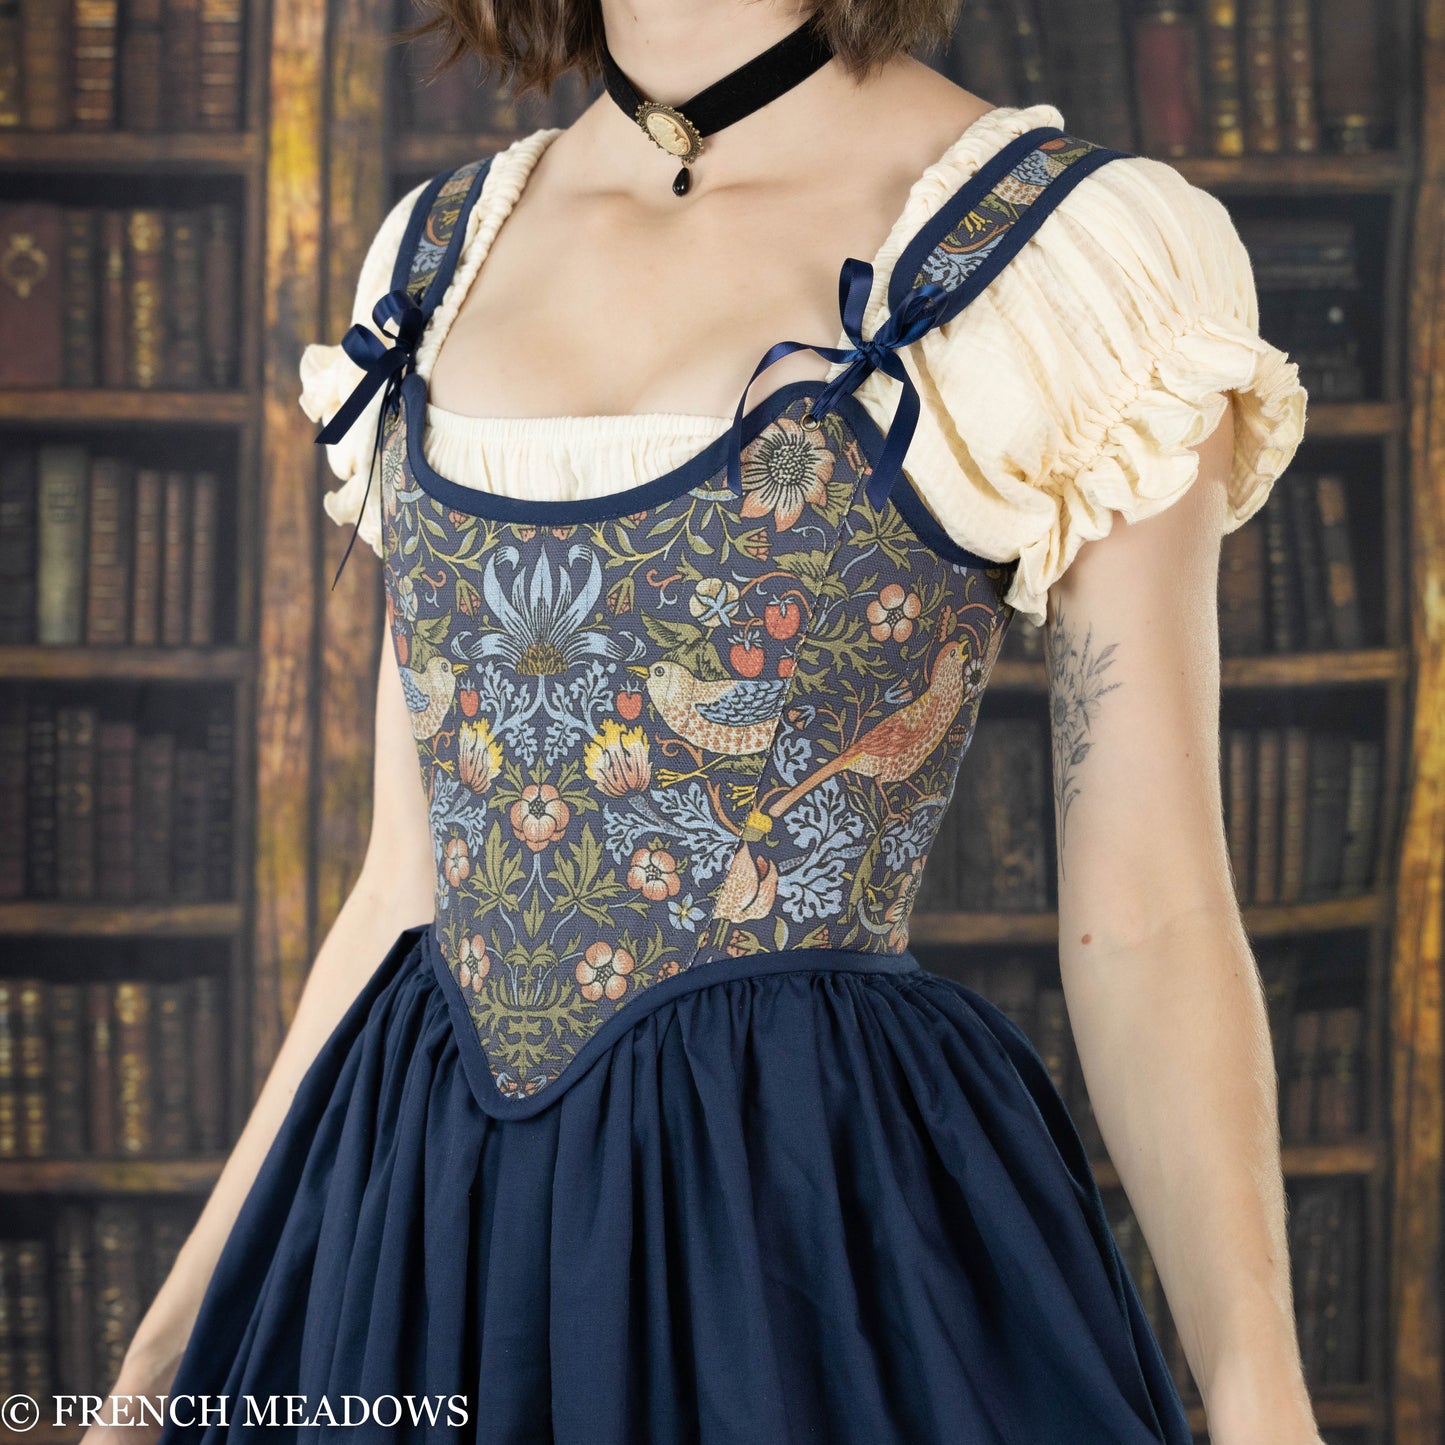 Load image into Gallery viewer, william morris strawberry thief corset tapestry corset elizabethan stays renaissance faire costume
